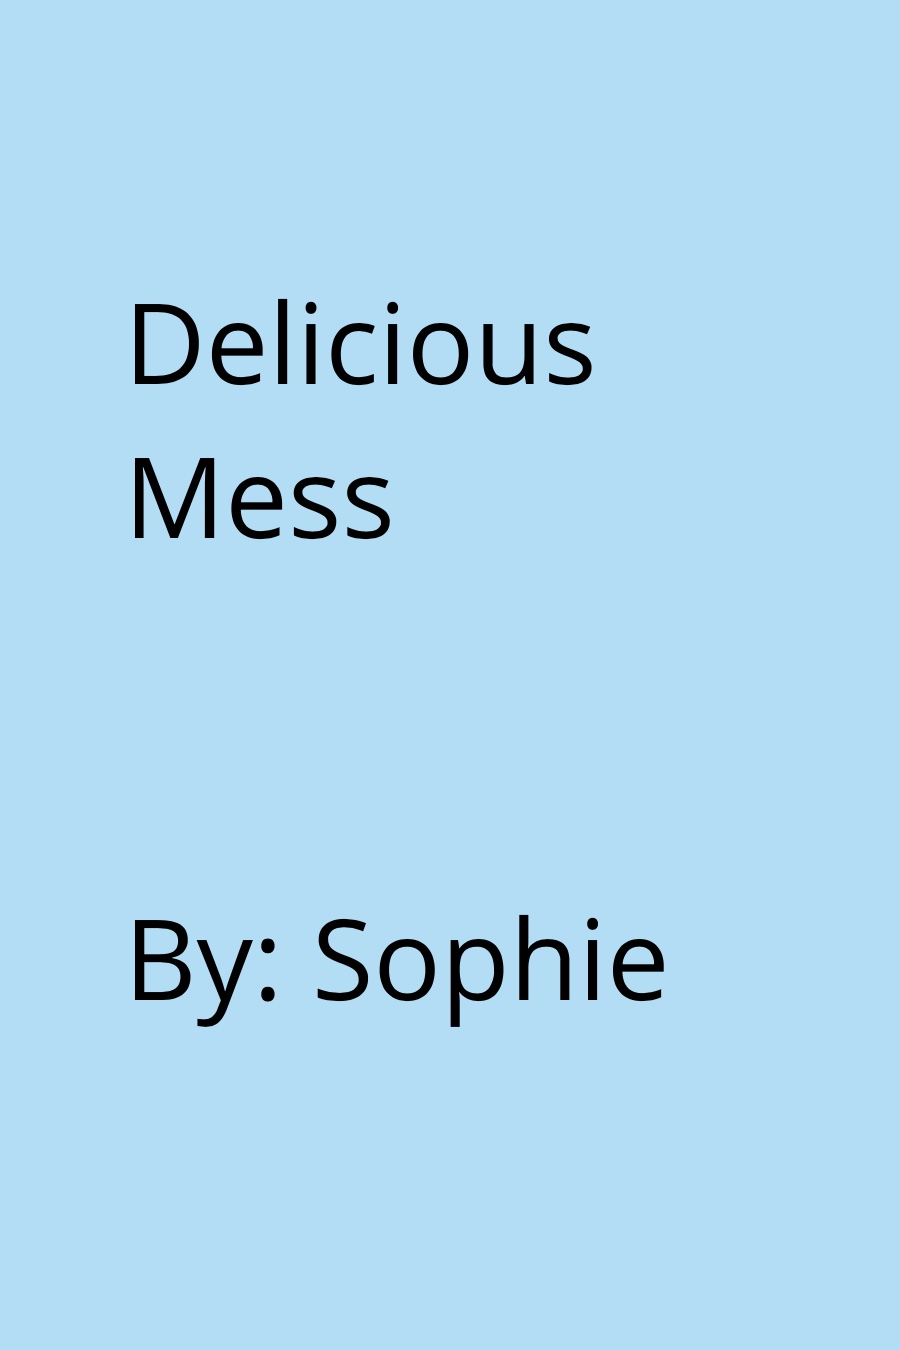 Delicious Mess by Sophie W